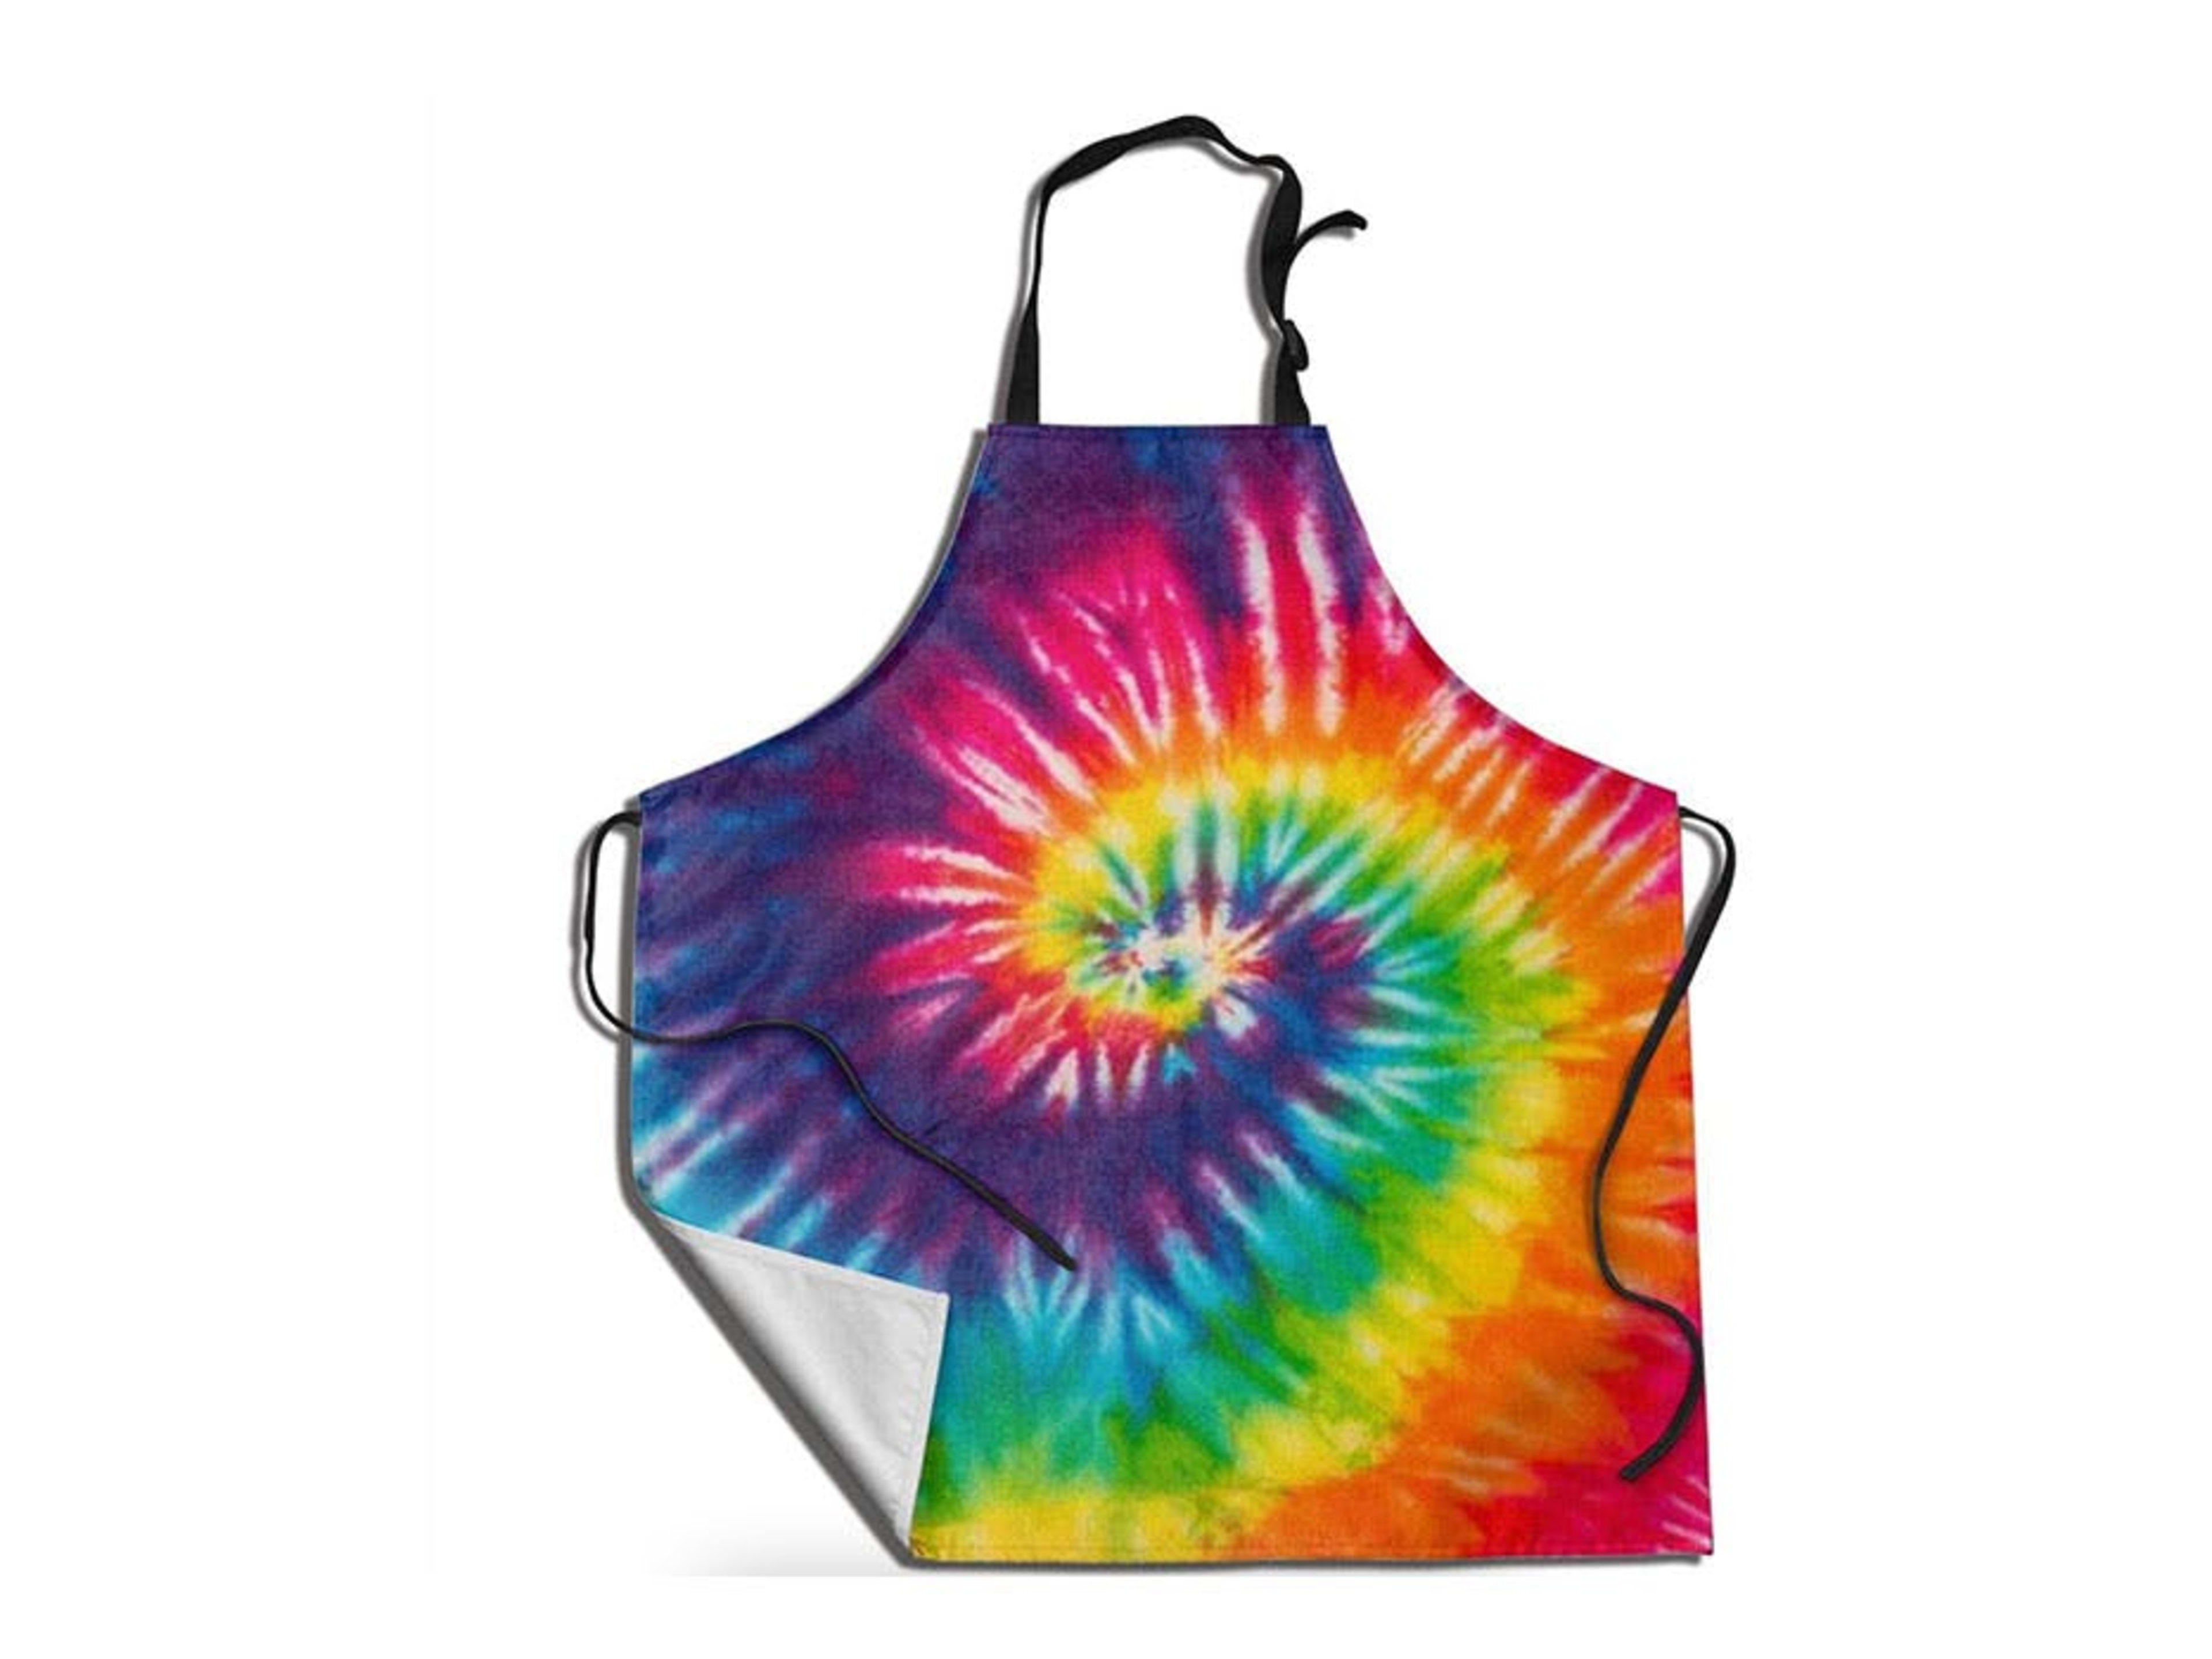 The Best Aprons For At-Home Cooking, According to Food People image